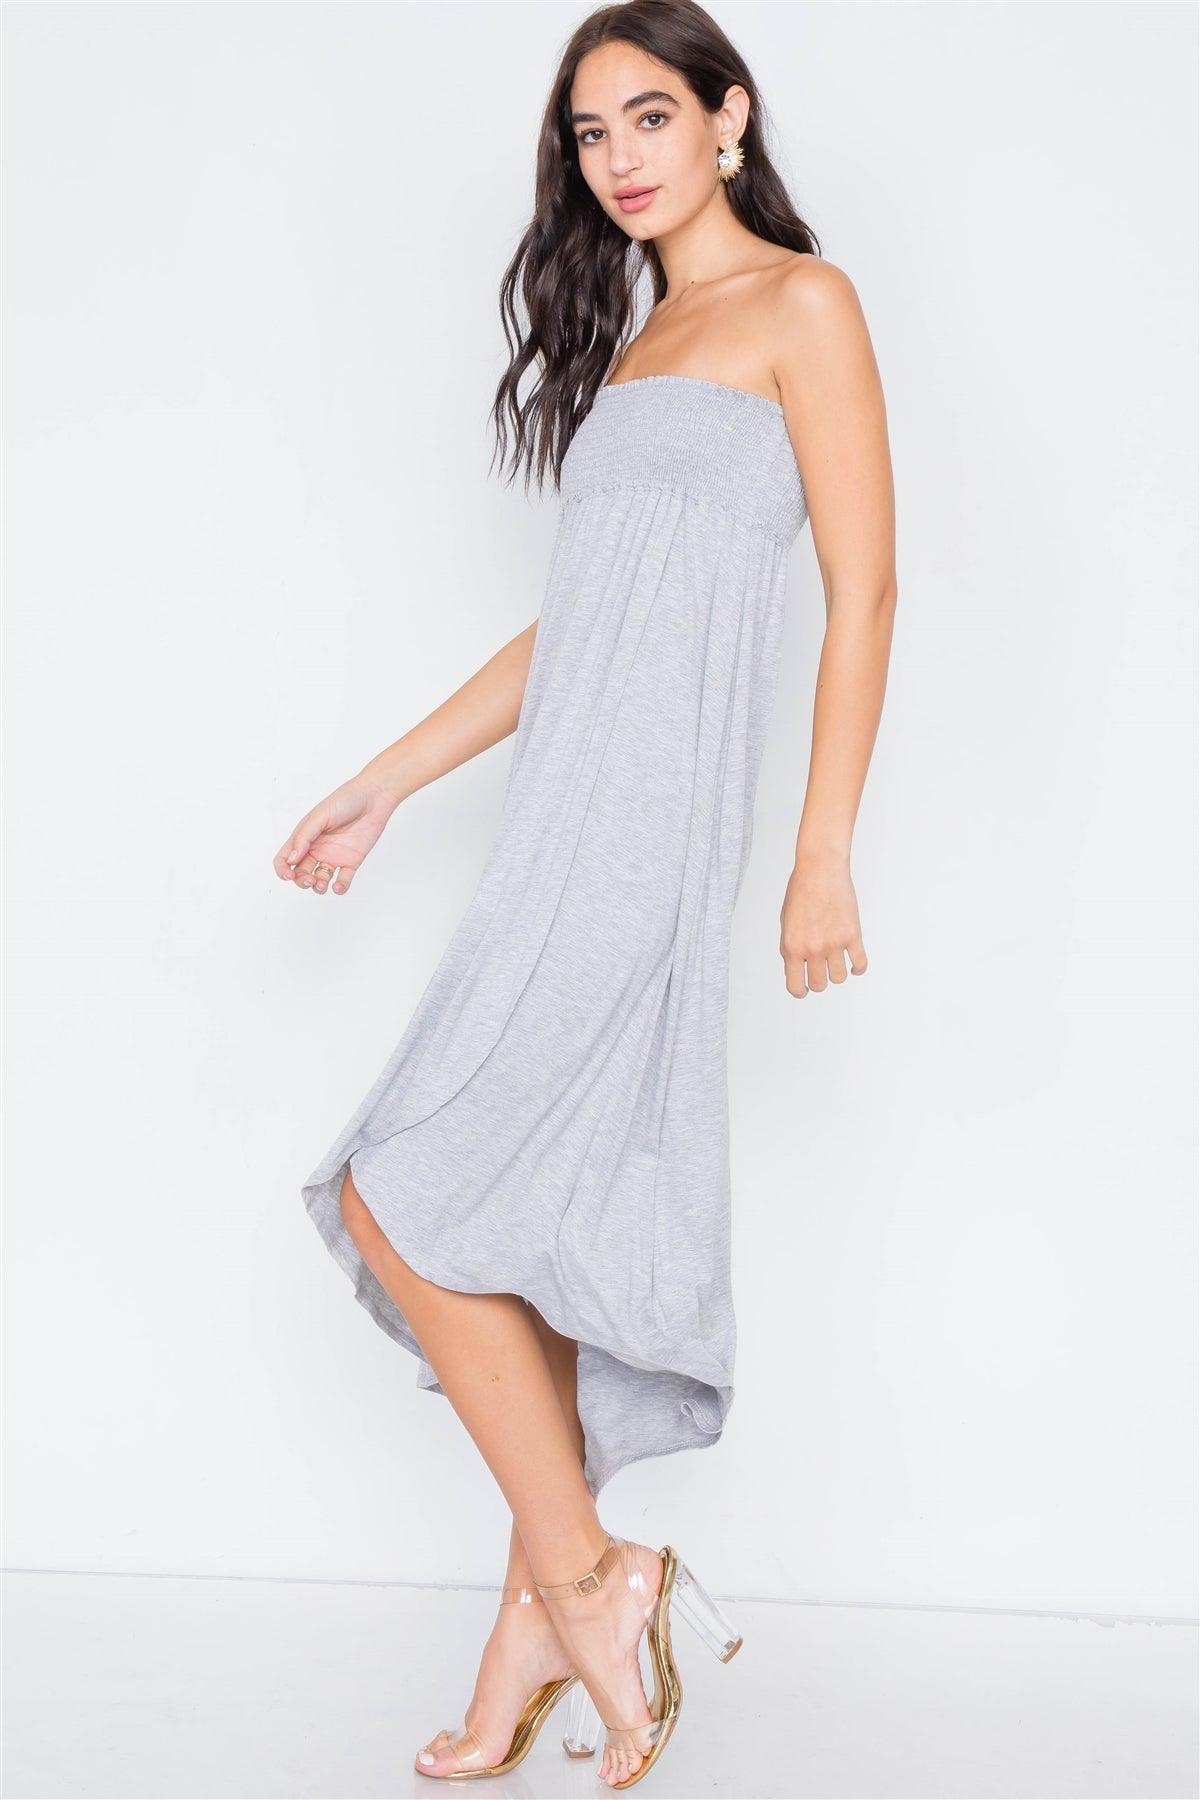 Heather Grey Off-The-Shoulder Ruched Tube Top Midi Dress /1-2-2